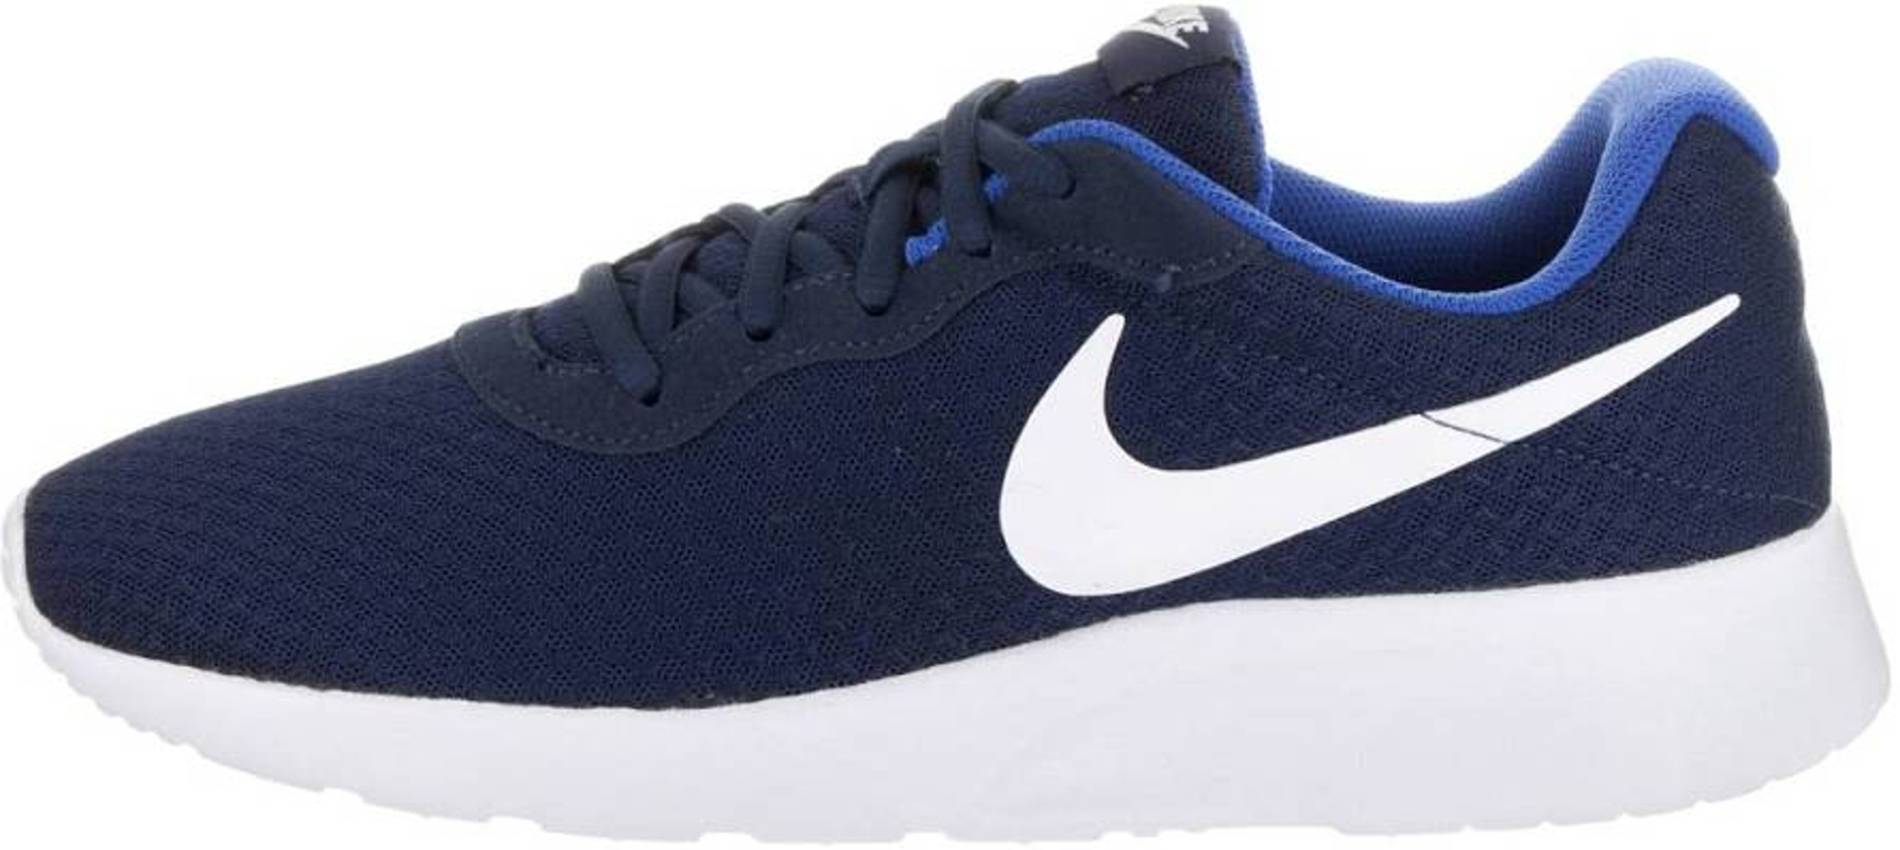 Save 38% on Blue Nike Sneakers (132 